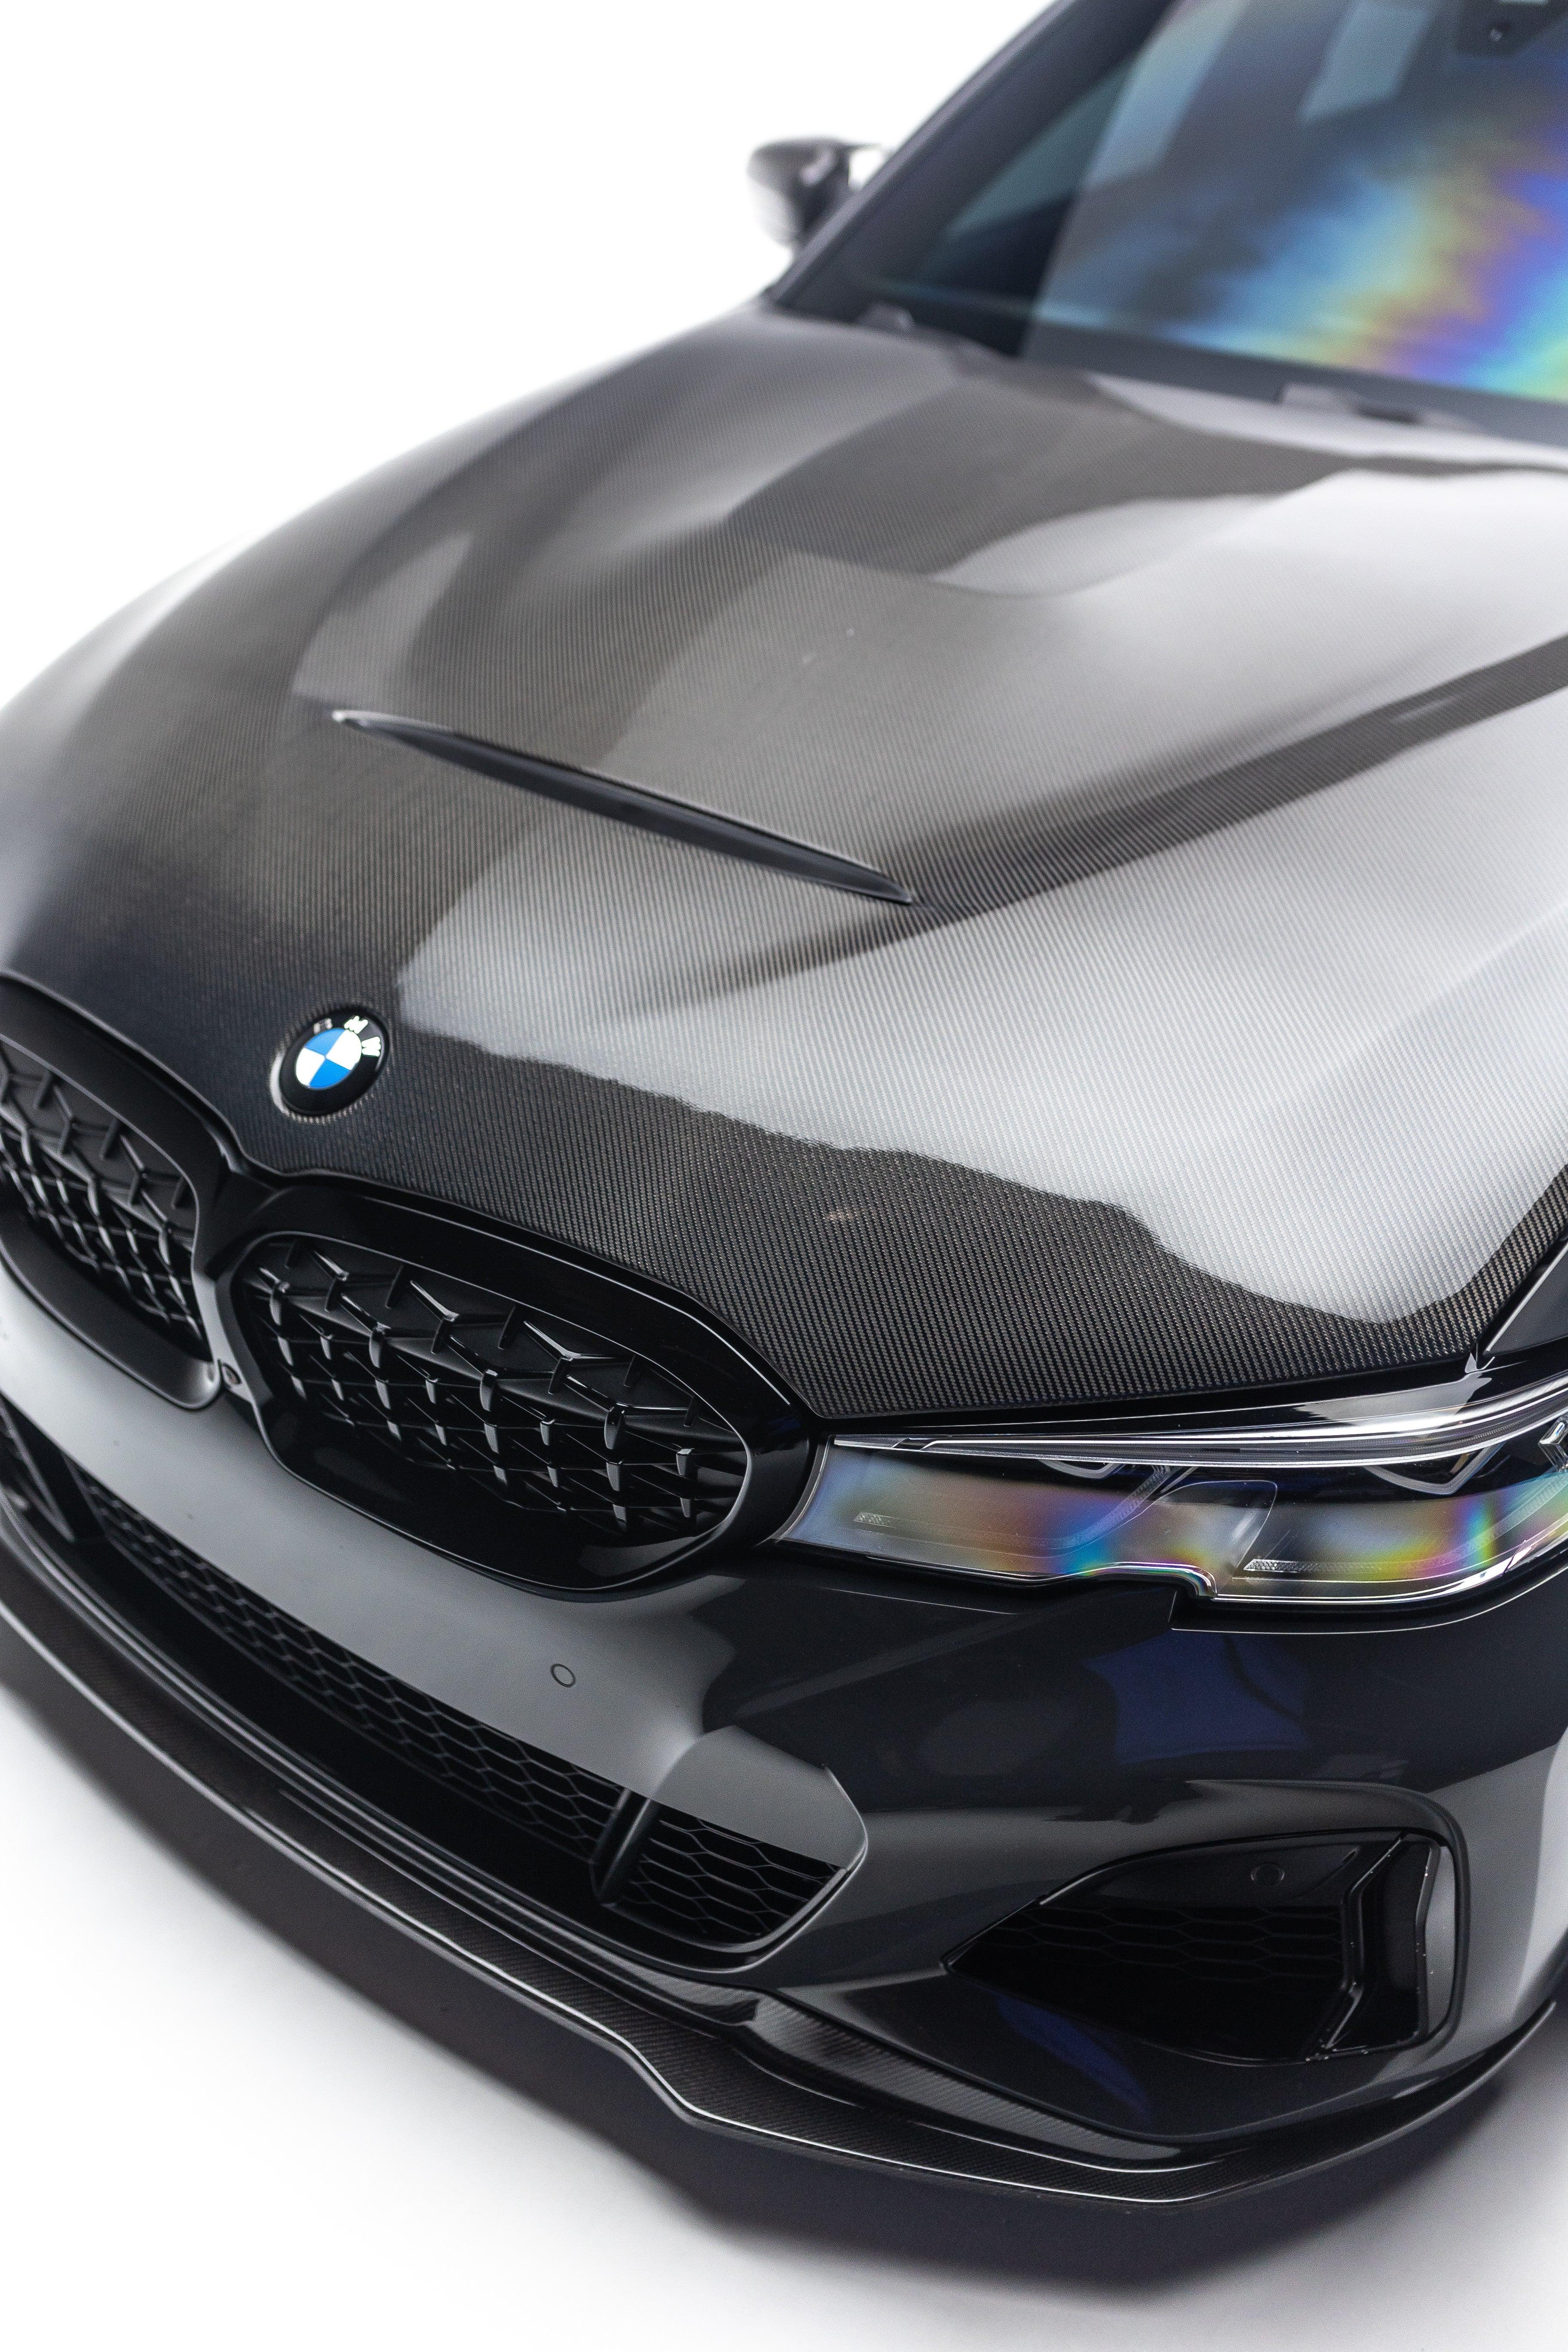 GTS Style Carbon Fiber Front Hood - BMW G20 3 Series